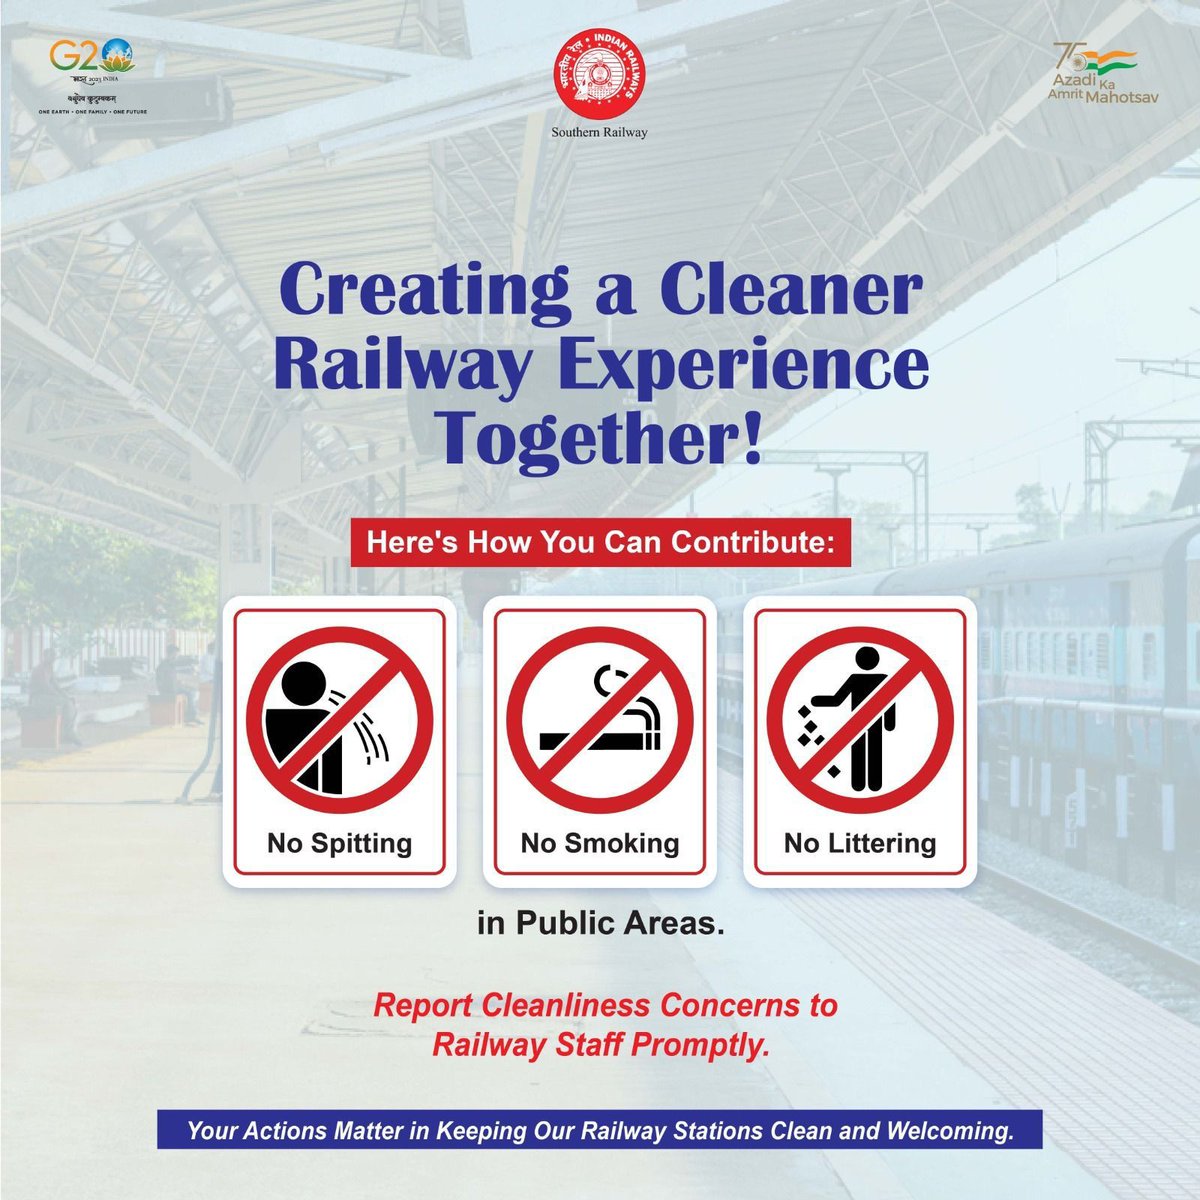 Creating a cleaner railway experience is a collective effort.

Let's join hands in keeping the station premises clean by avoid spitting, littering and smoking.

Your small actions Matter in ensuring a pleasant journey for everyone.

#Cleanliness #Safejourney #Hygiene